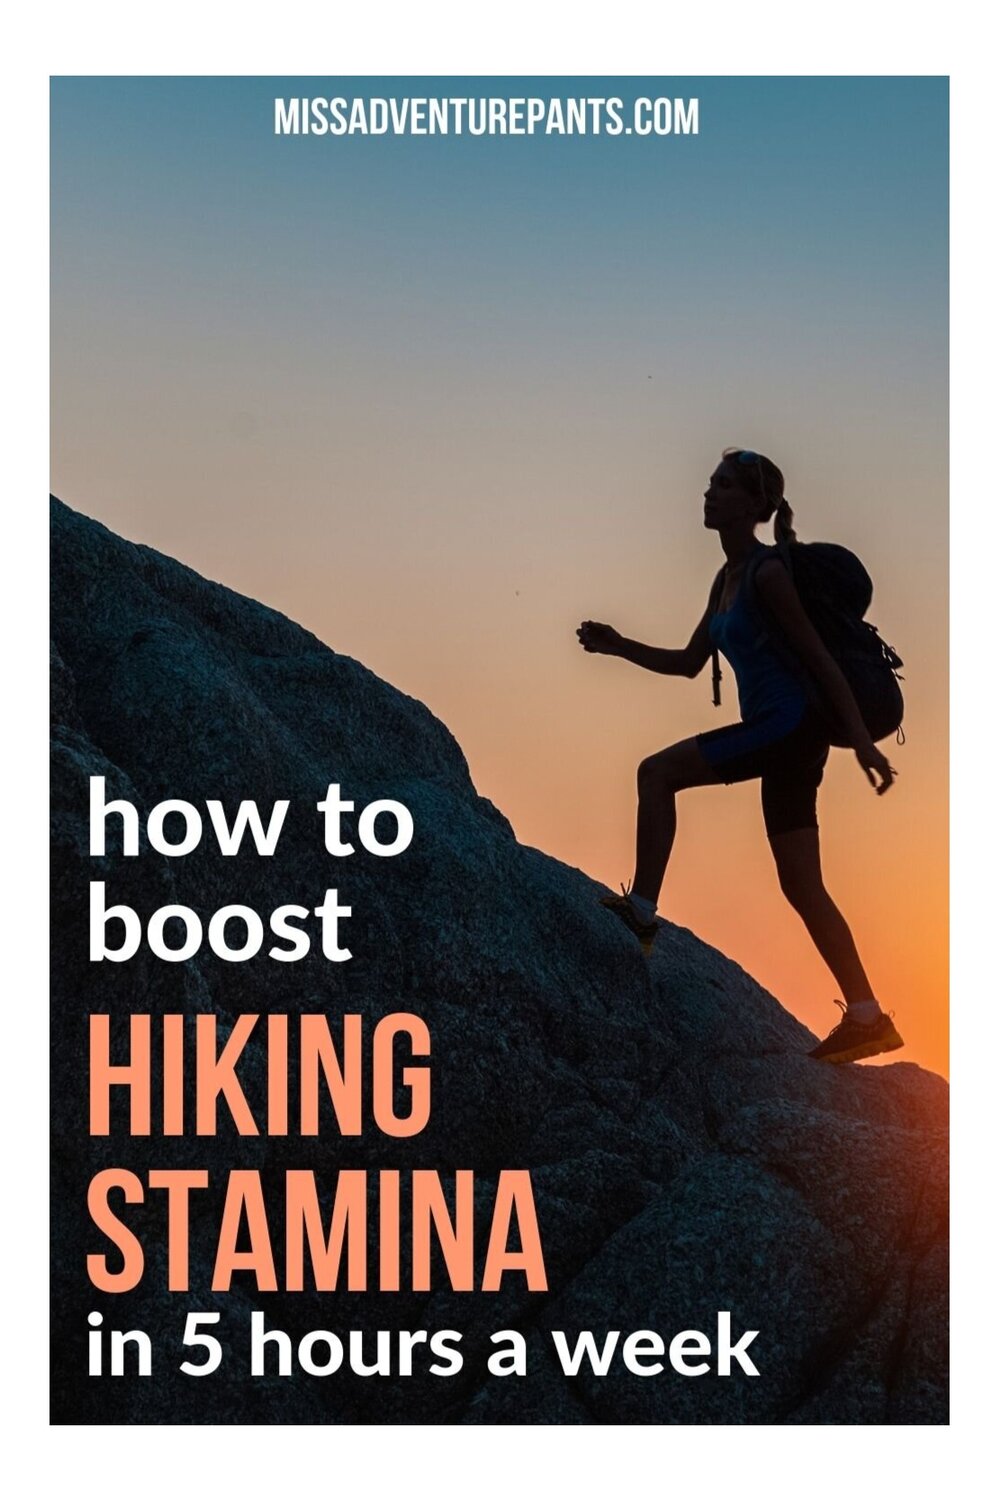 How to Increase Stamina in a Week - What You Should Know!